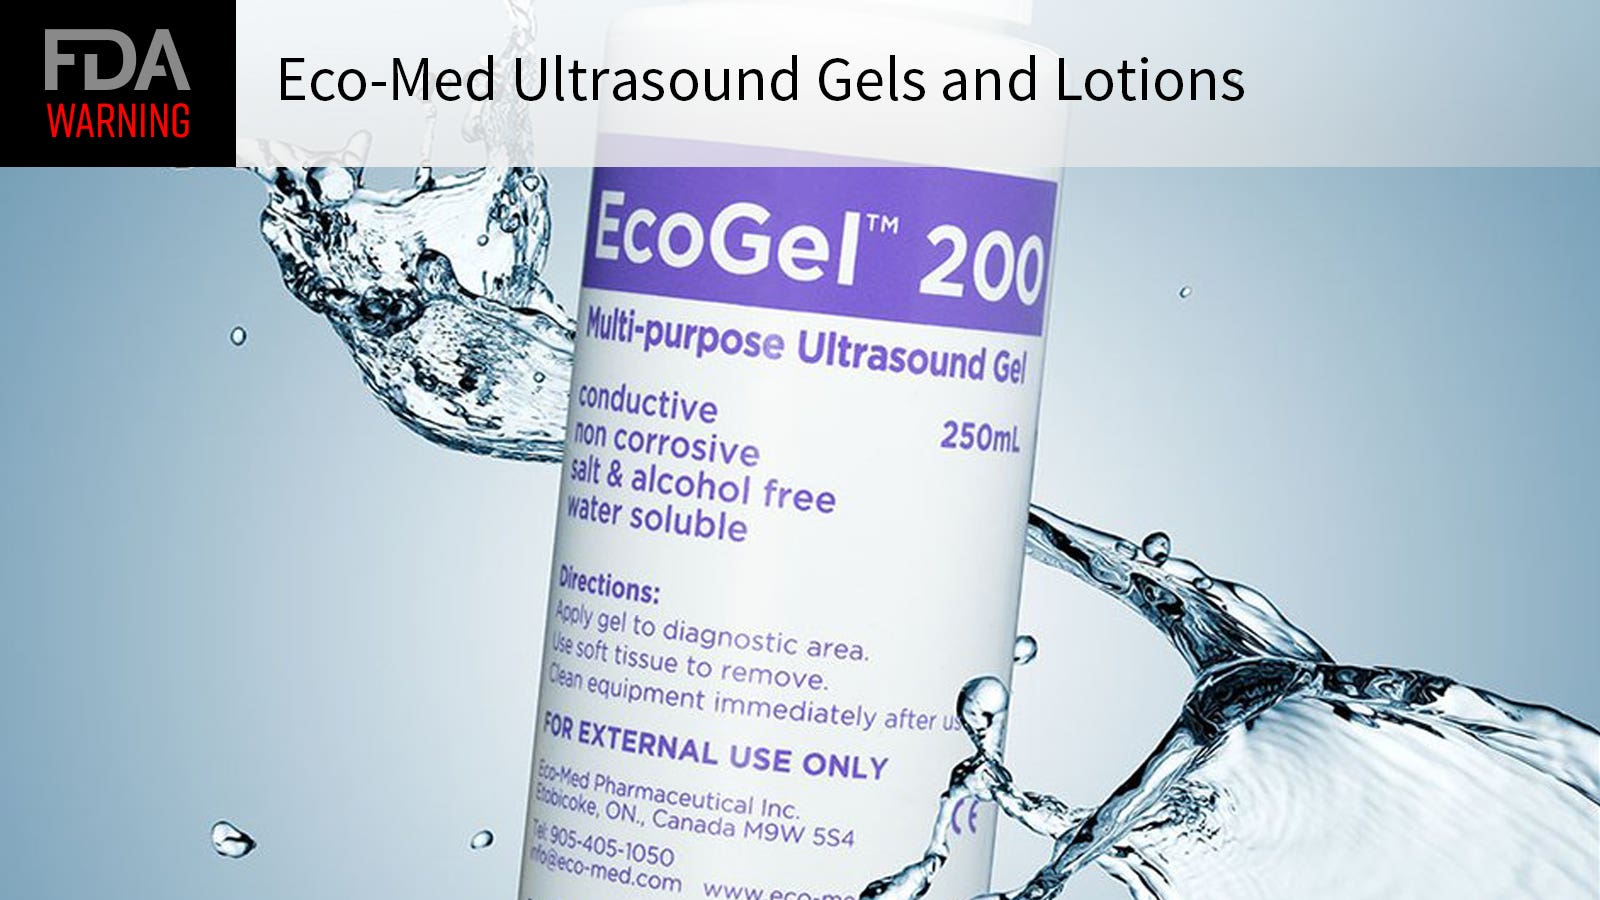 FDA Warns on Contamination Chance With Eco-Med Ultrasound Gels